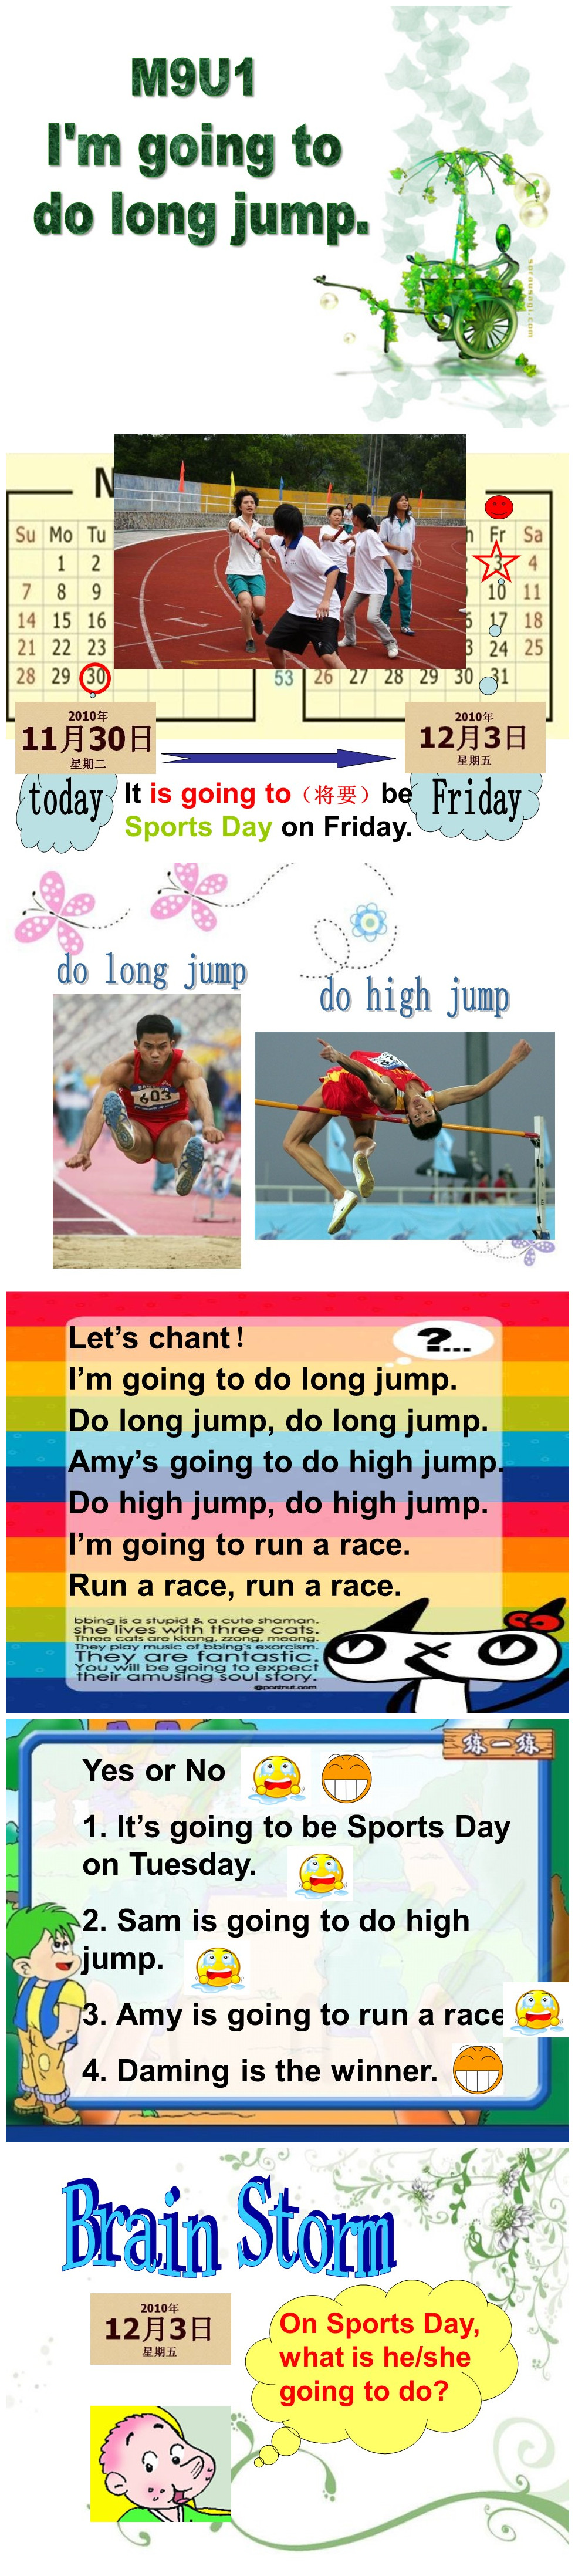 《I'm going to do long jump》PPT课件